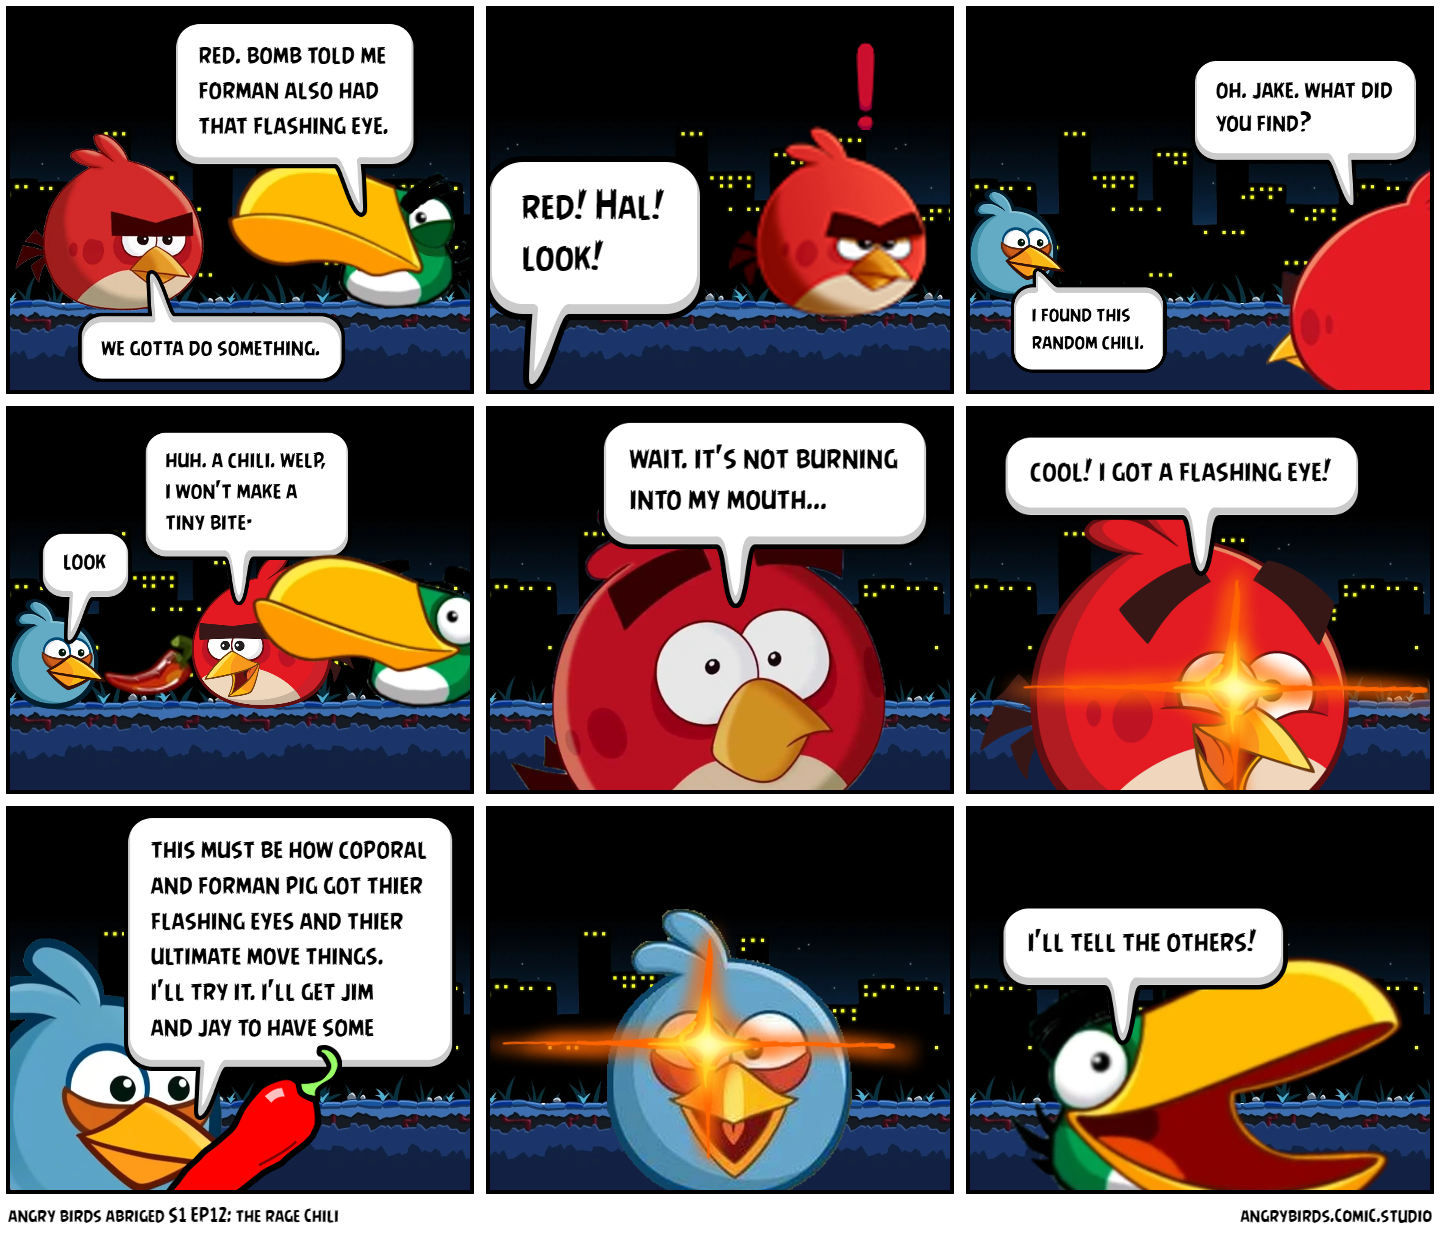 angry birds abriged S1 EP12: the rage chili